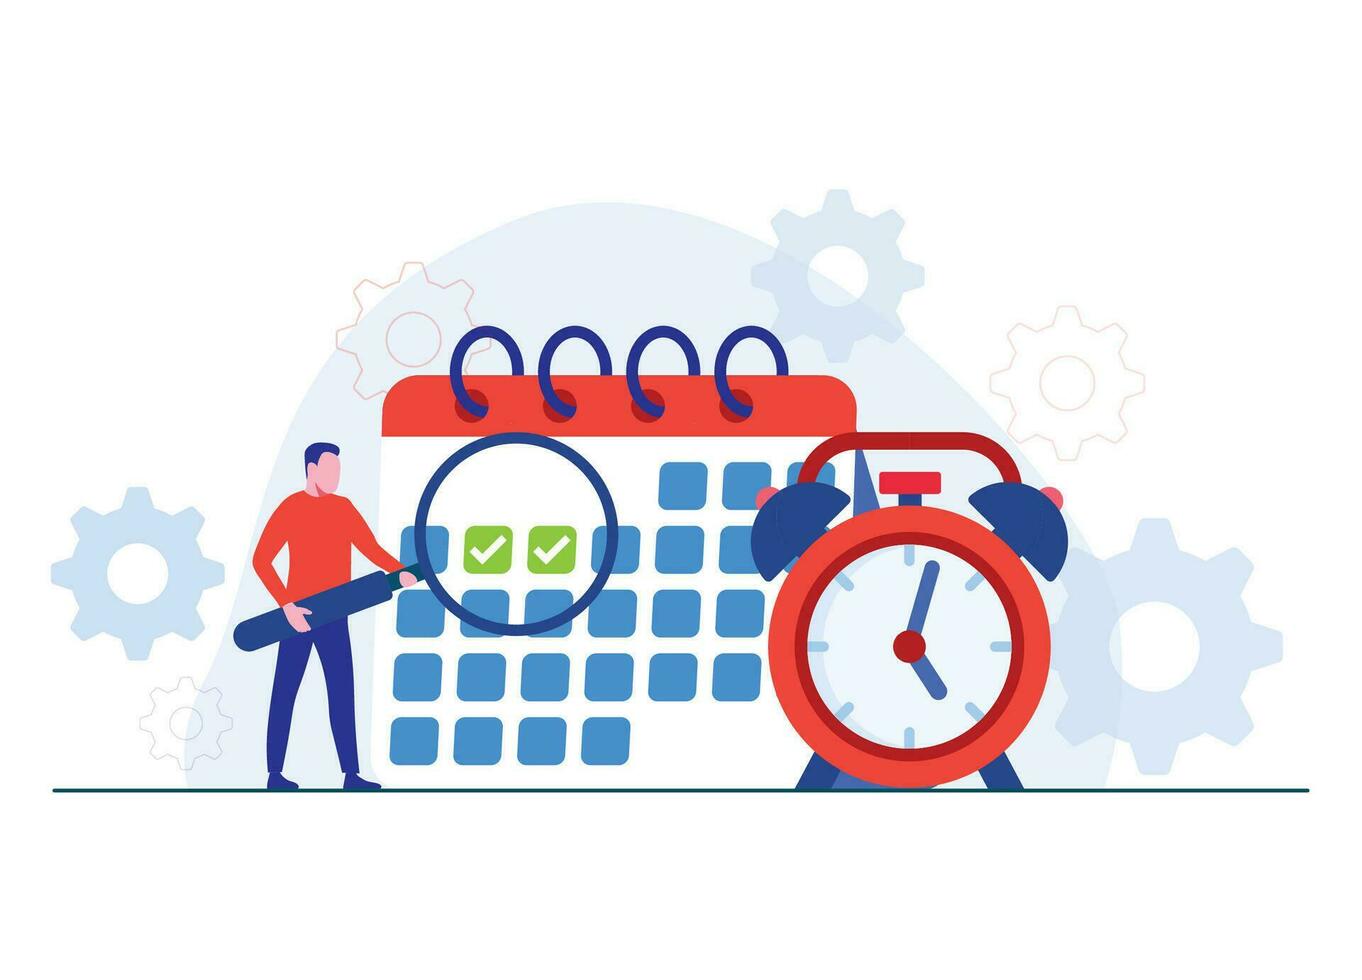 Empowering business planning and efficiency - business time management, productivity, Flat illustration of a male employee with calendar and clock, Efficient workday vector